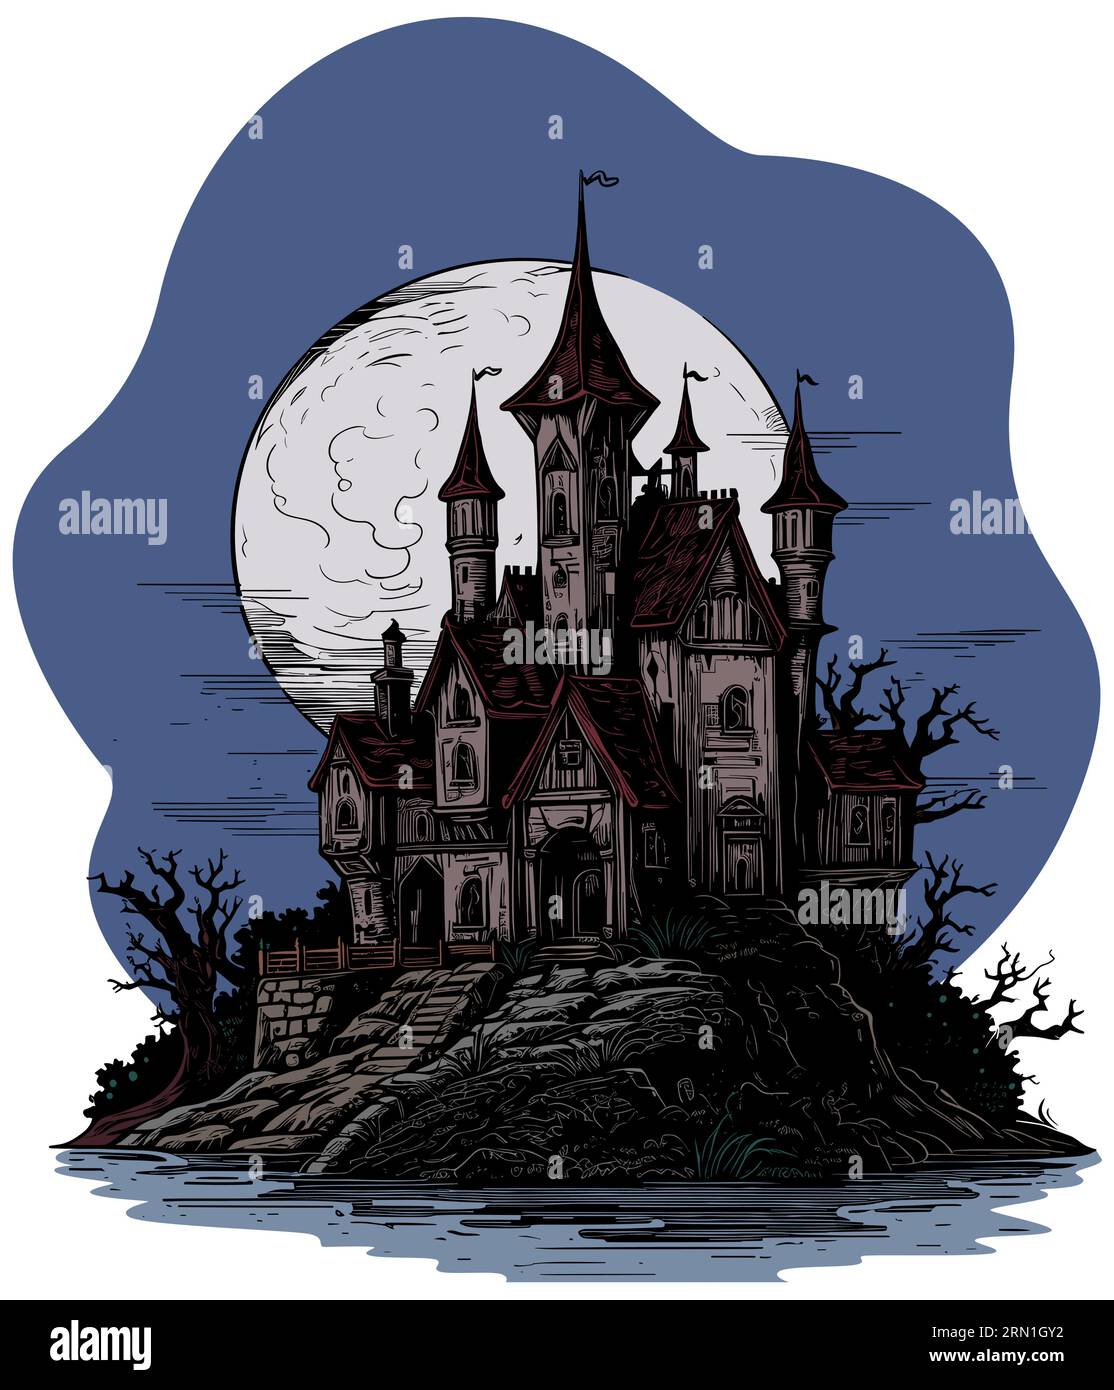 Illustration of creepy dark castle at night, isolated on white background. Stock Vector